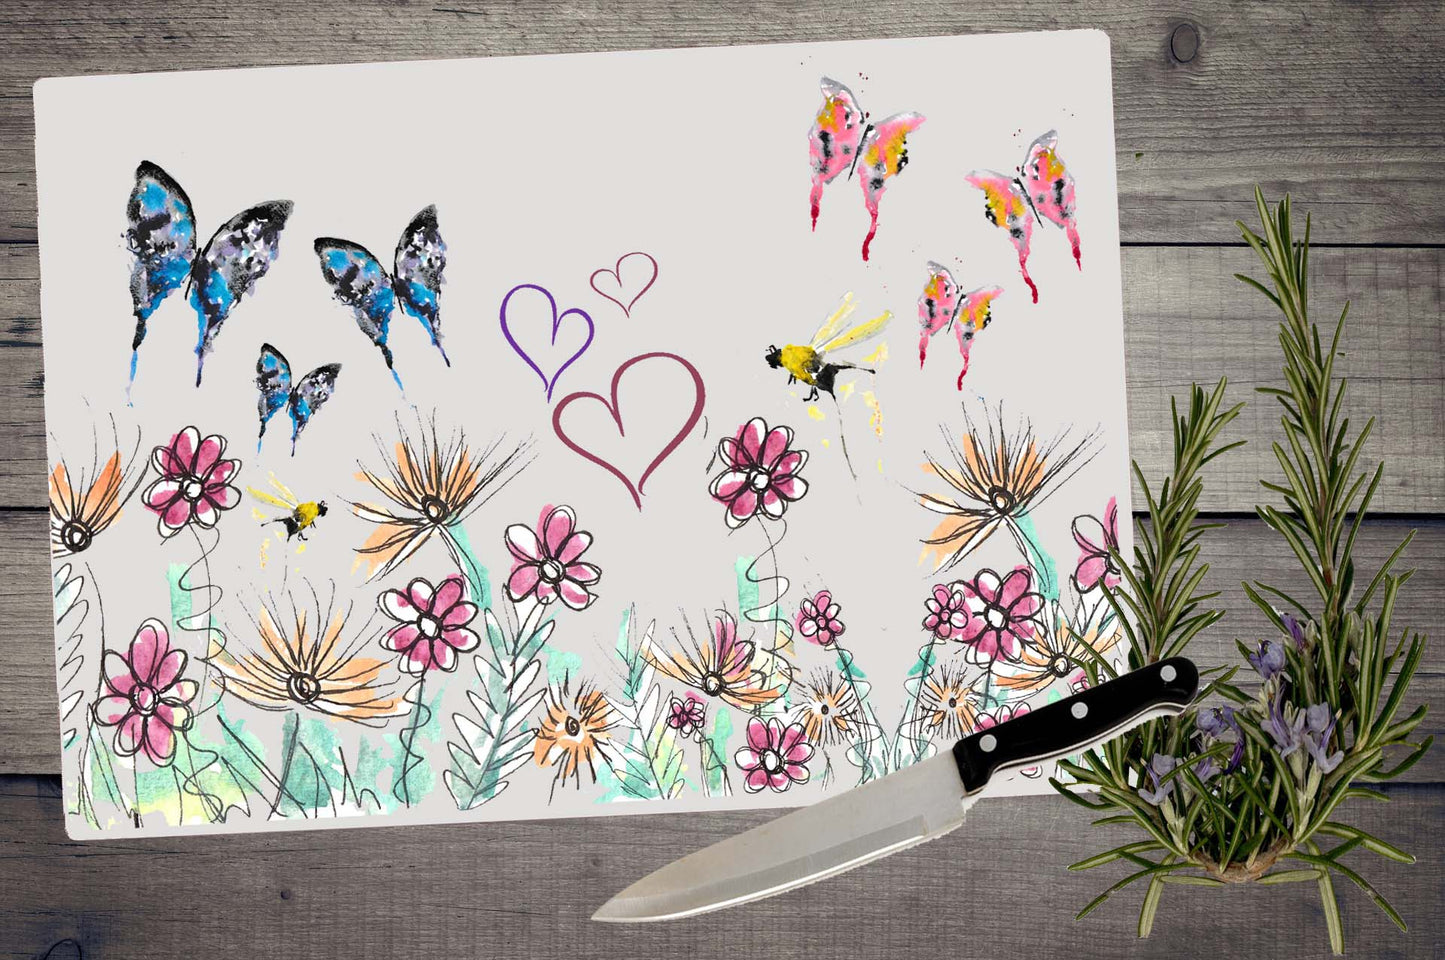 Flower and butterfly chopping board / Worktop saver